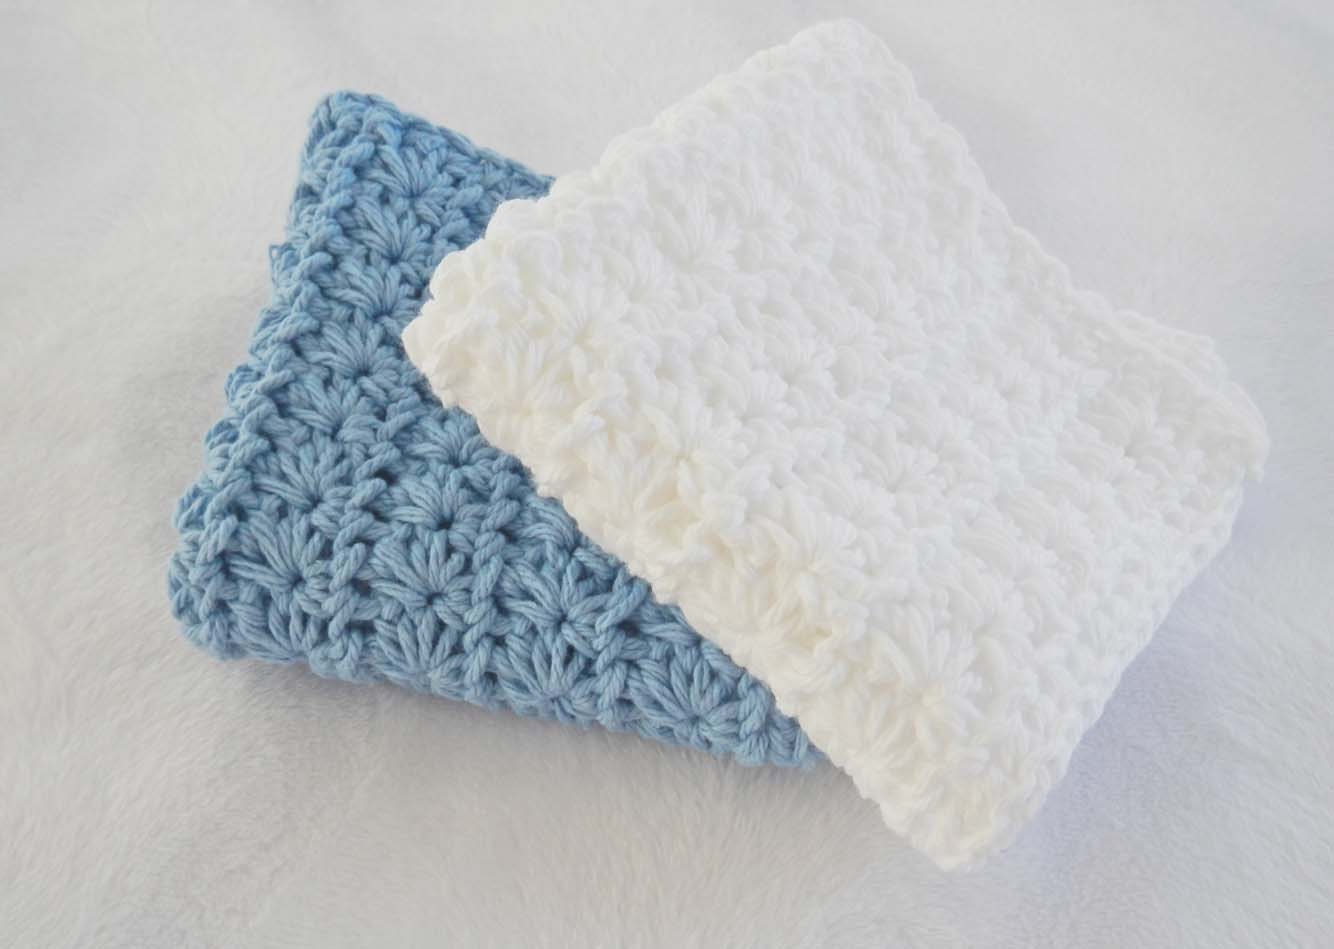 Crochet Washcloth or Dish Cloth for Bathroom or Kitchen - Cotton Cloth - Large - White and Blue - HerterCrochetDesigns